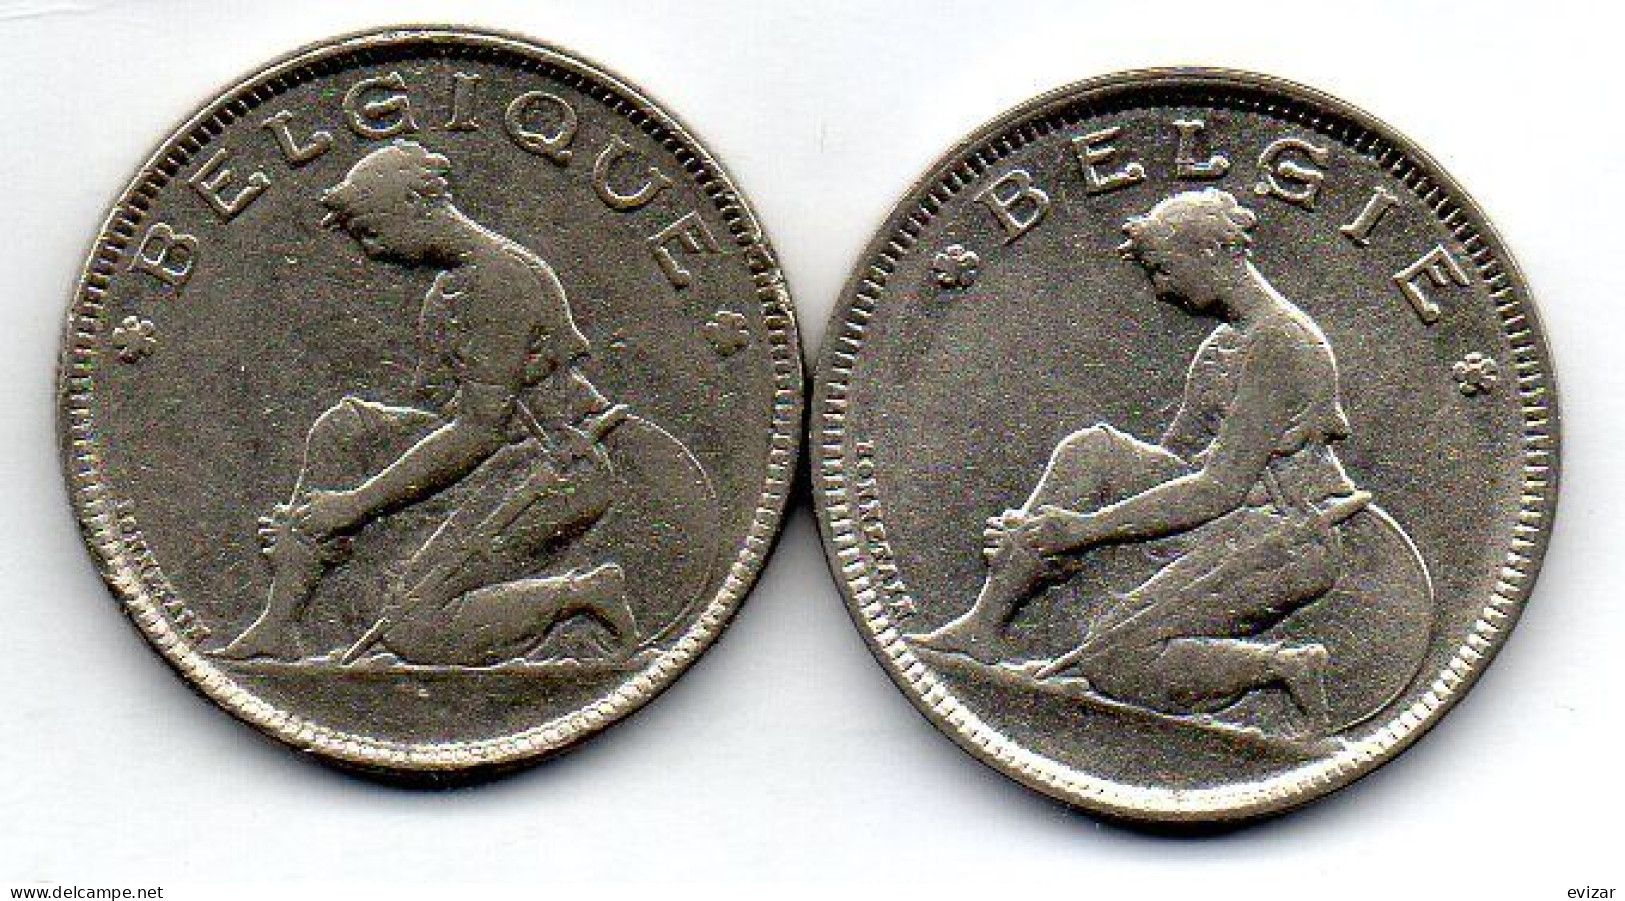 BELGIUM - Set Of Two Coins 2 Francs, Nickel, Year 1923, KM # 91.1, 92, French & Dutch Legend - 2 Frank